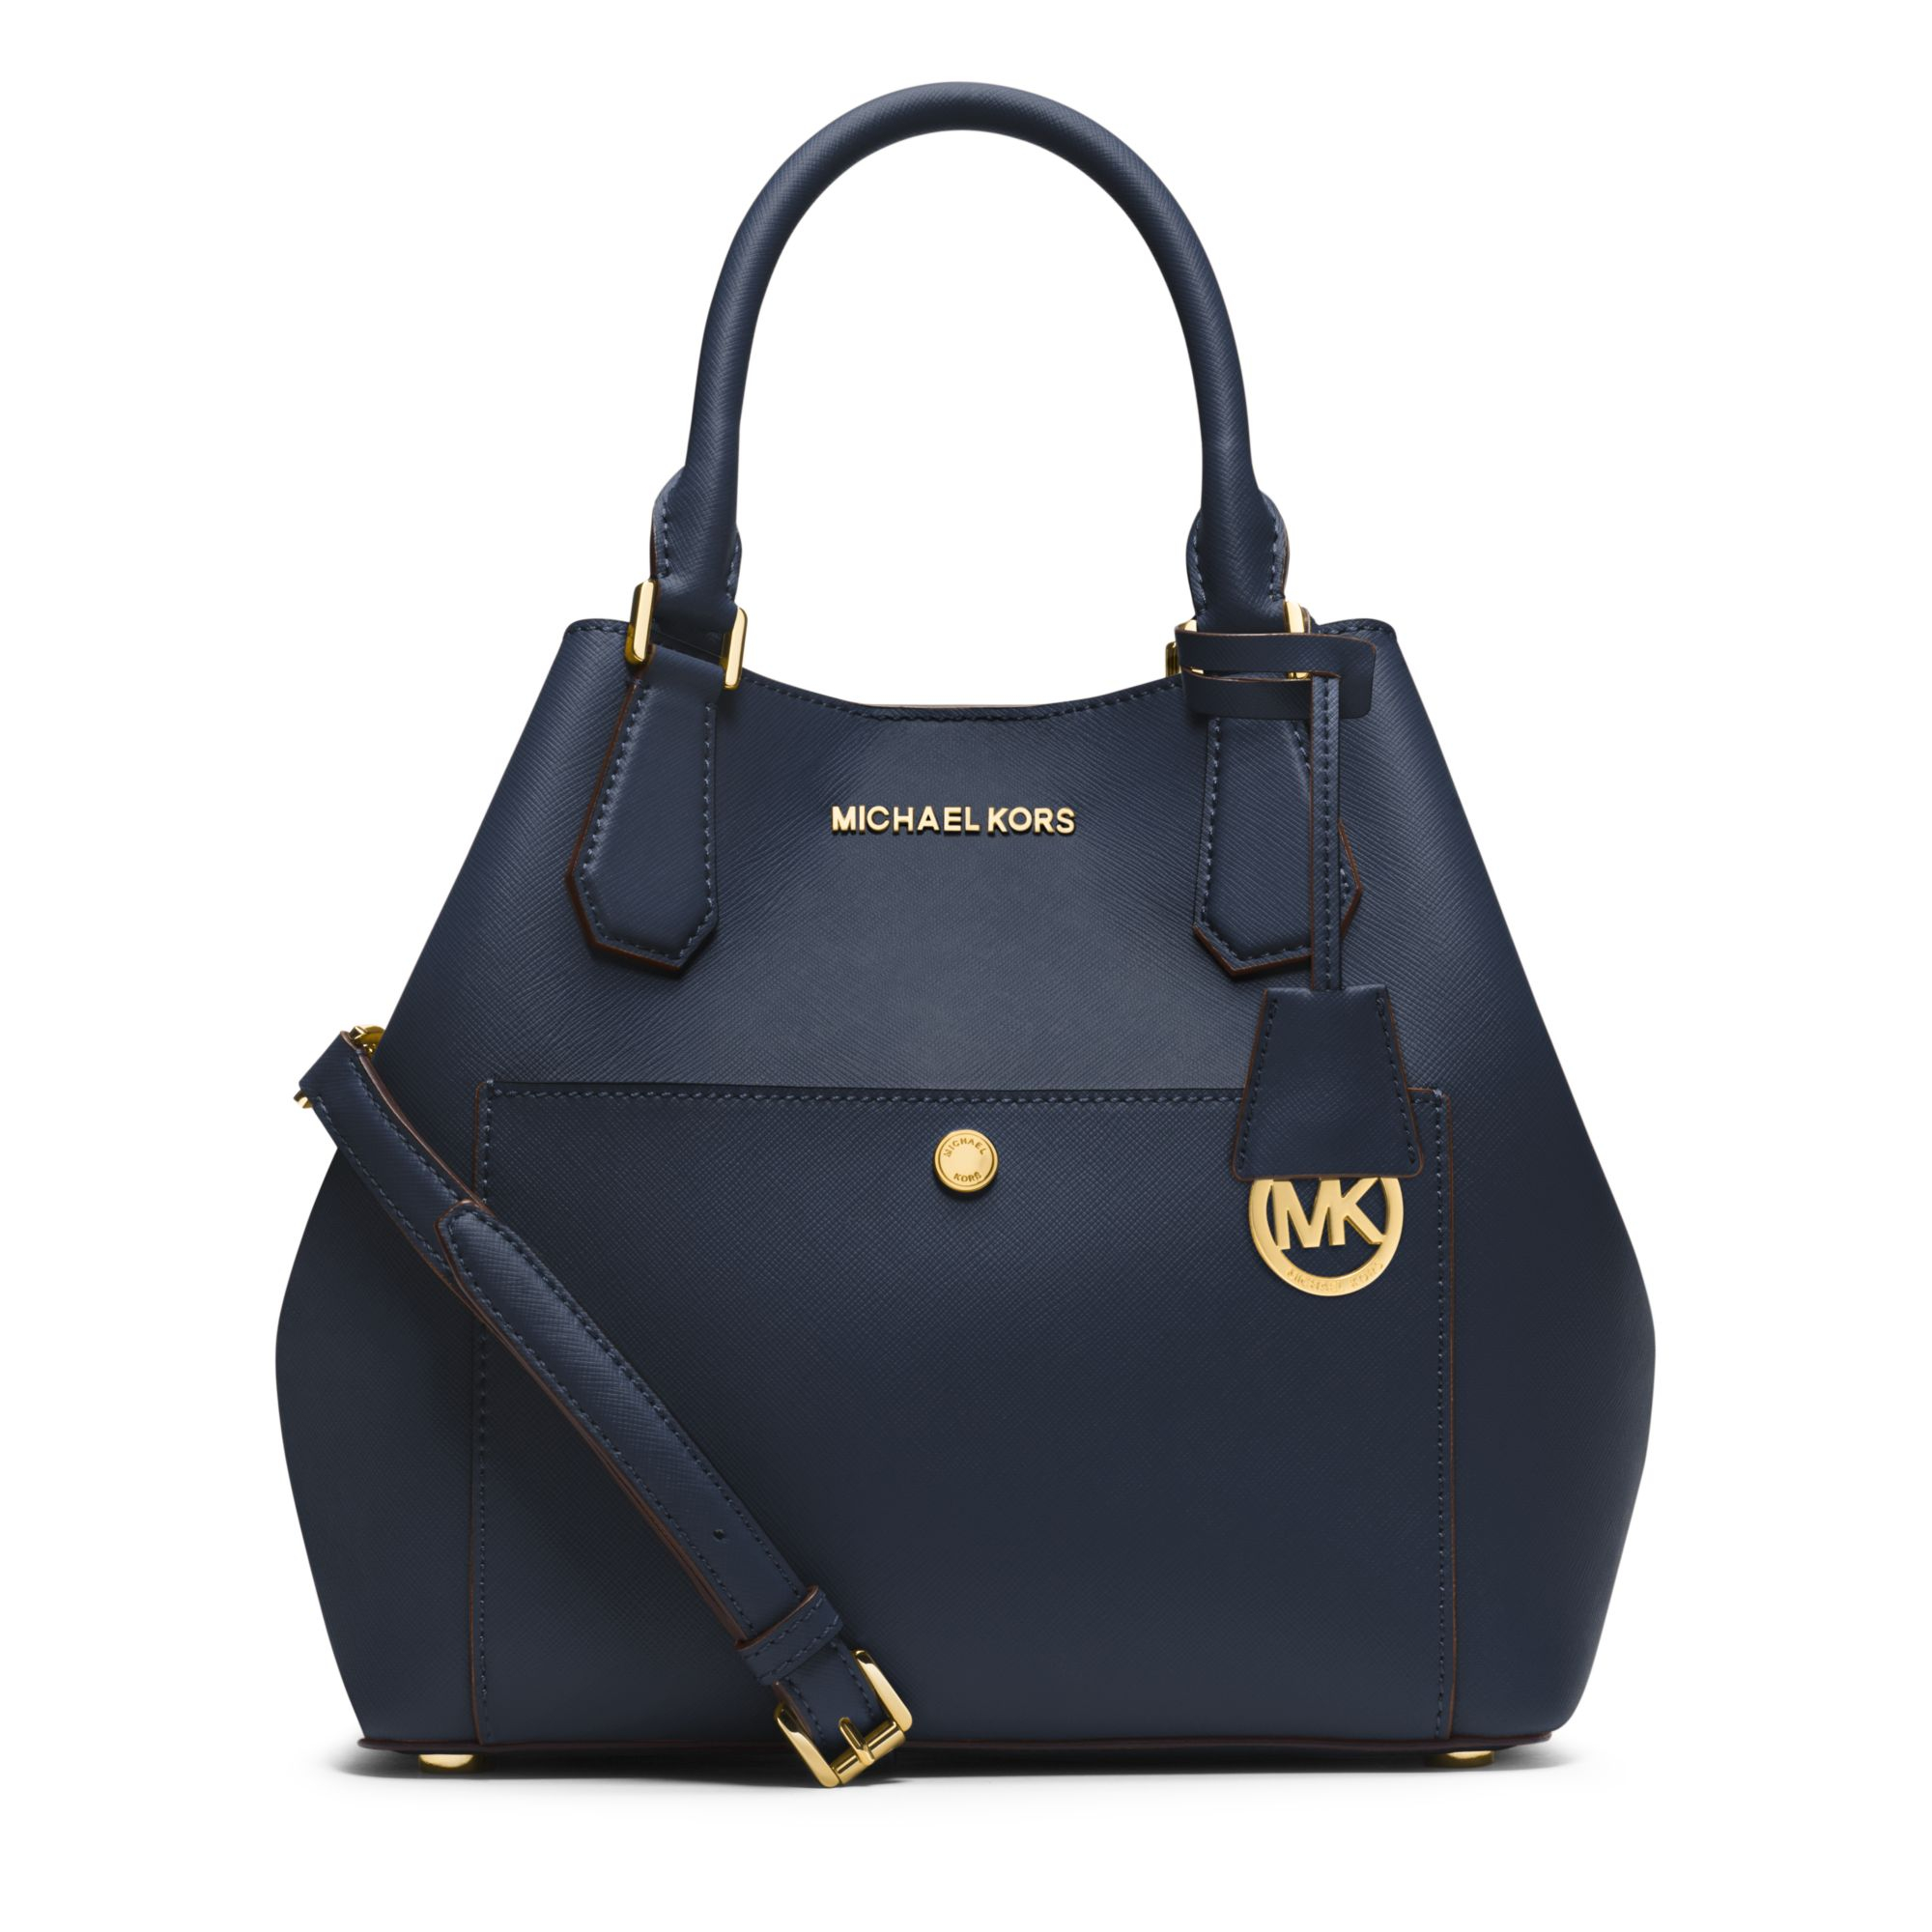 Lyst - Michael Kors Greenwich Large Saffiano Leather Satchel in Blue